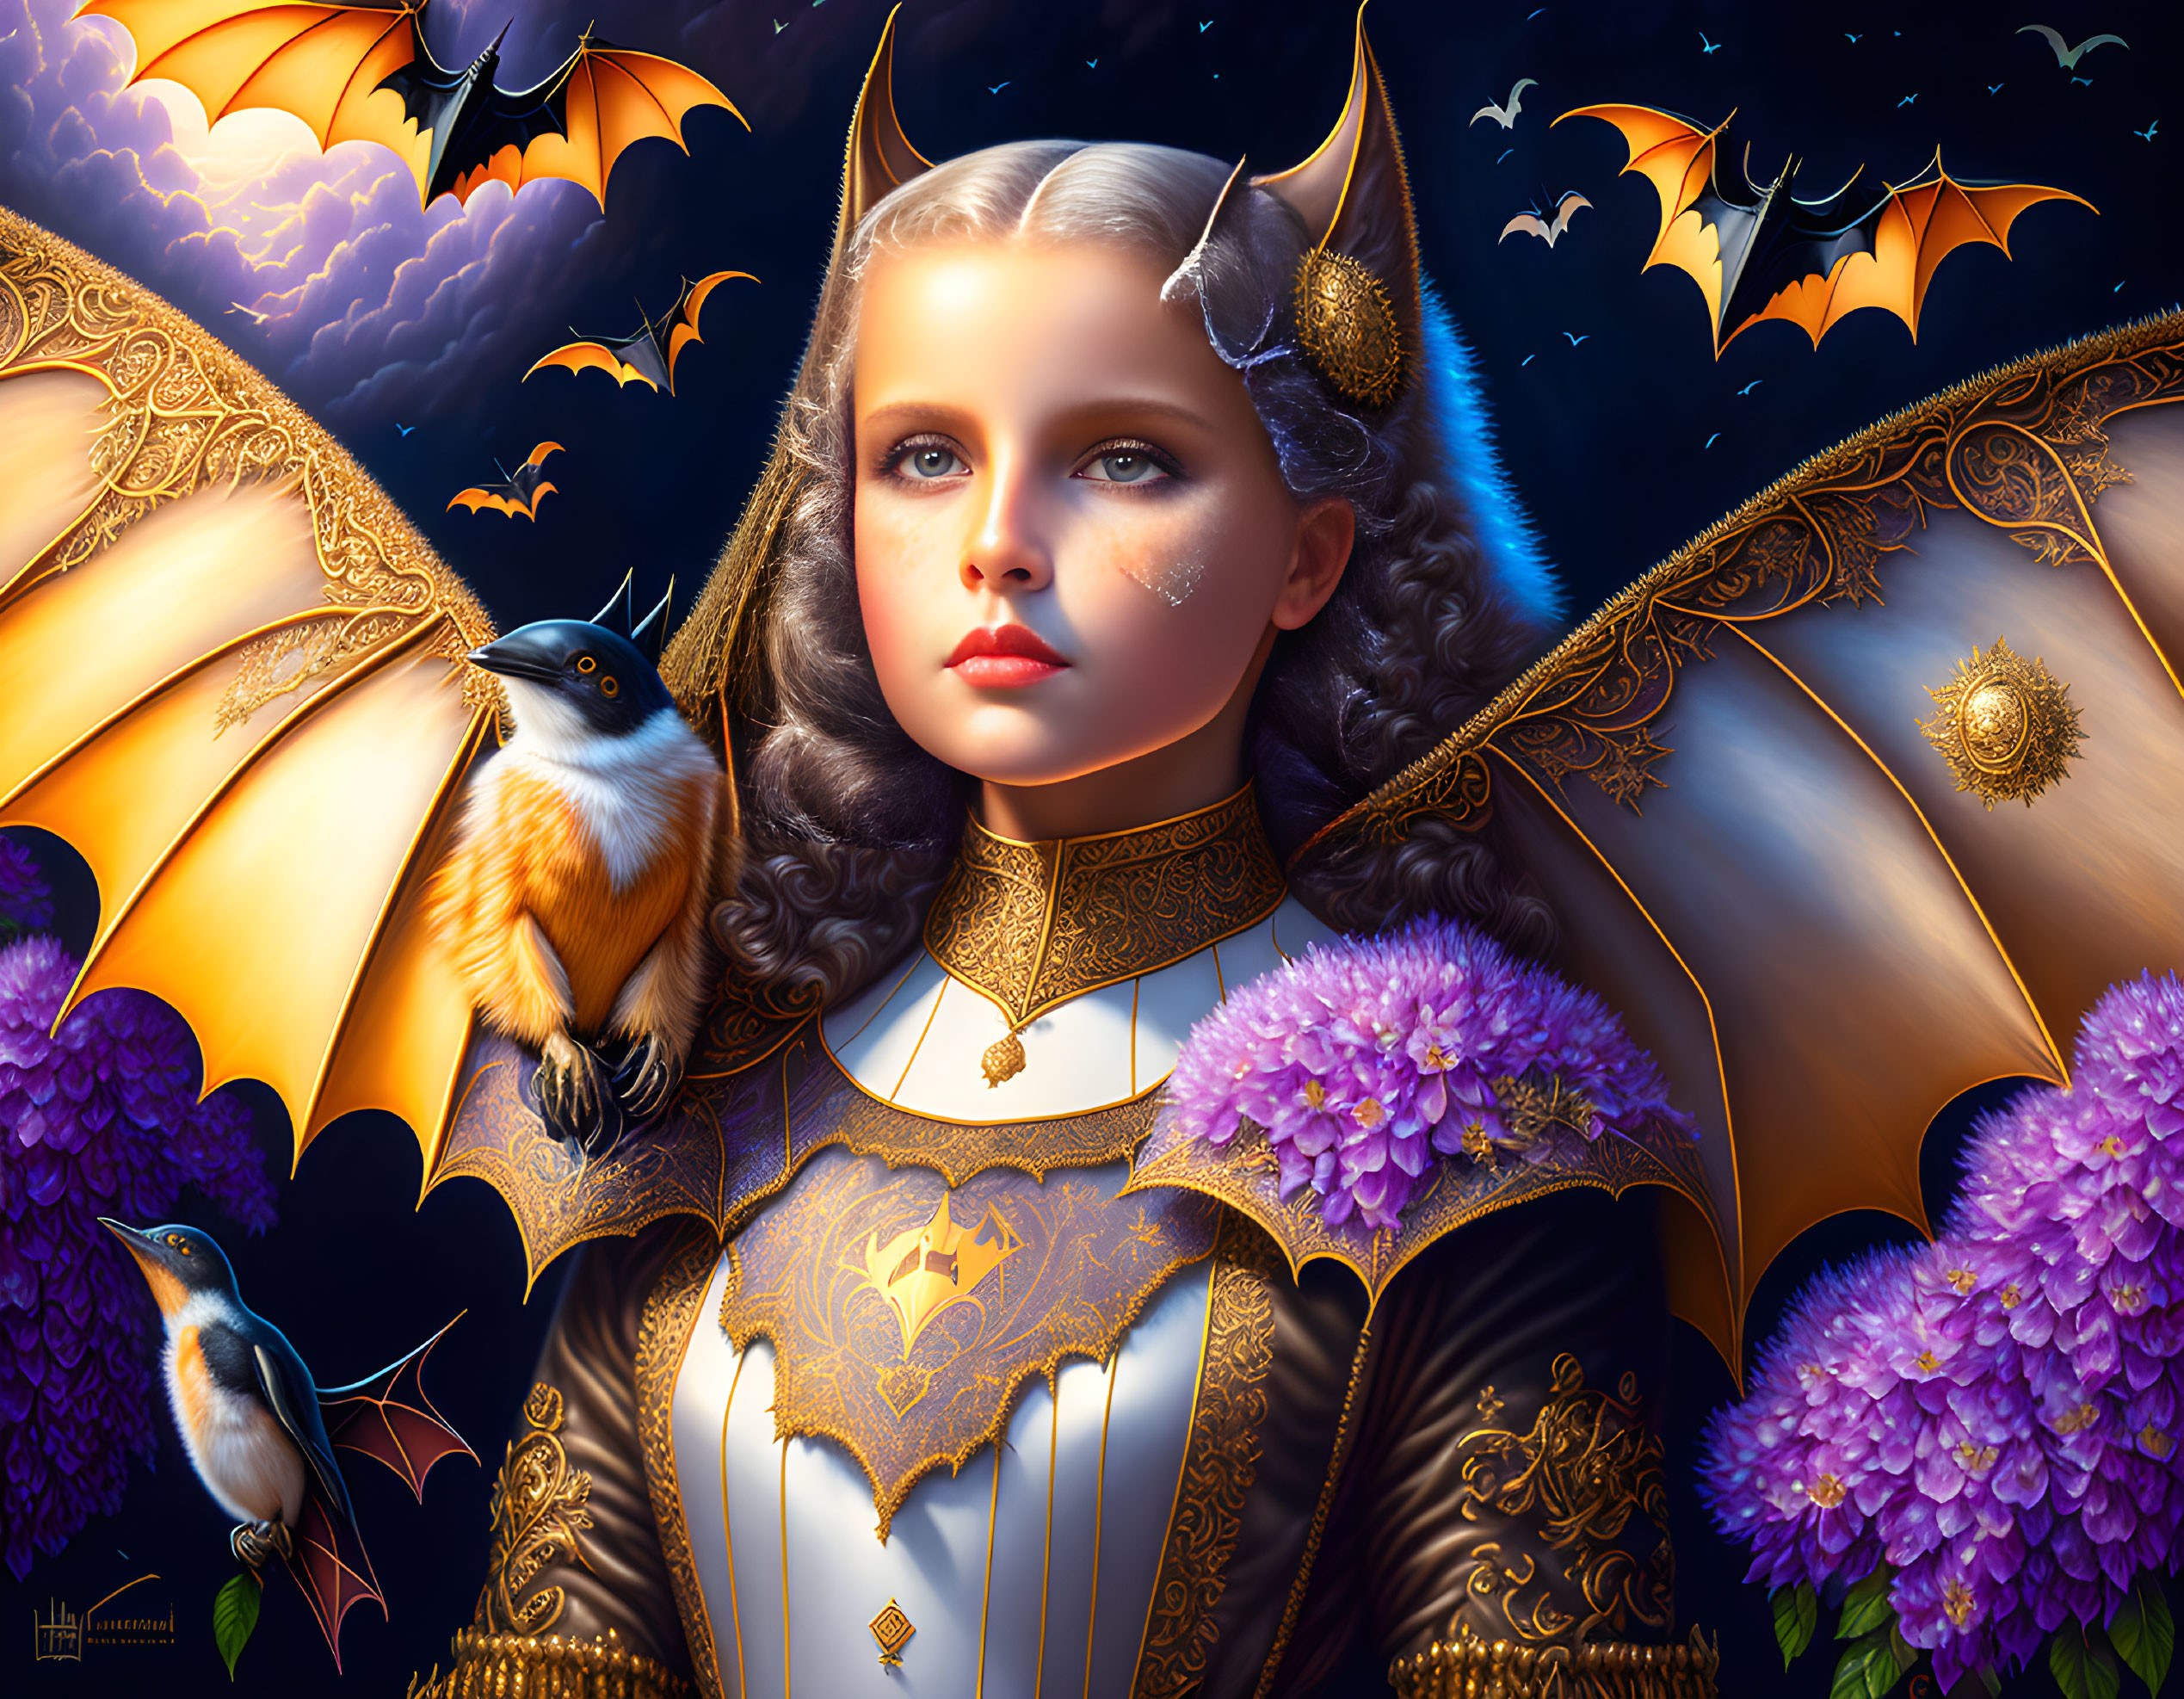 Young girl with bat-like wings in gothic costume, surrounded by flowers and birds under twilight sky